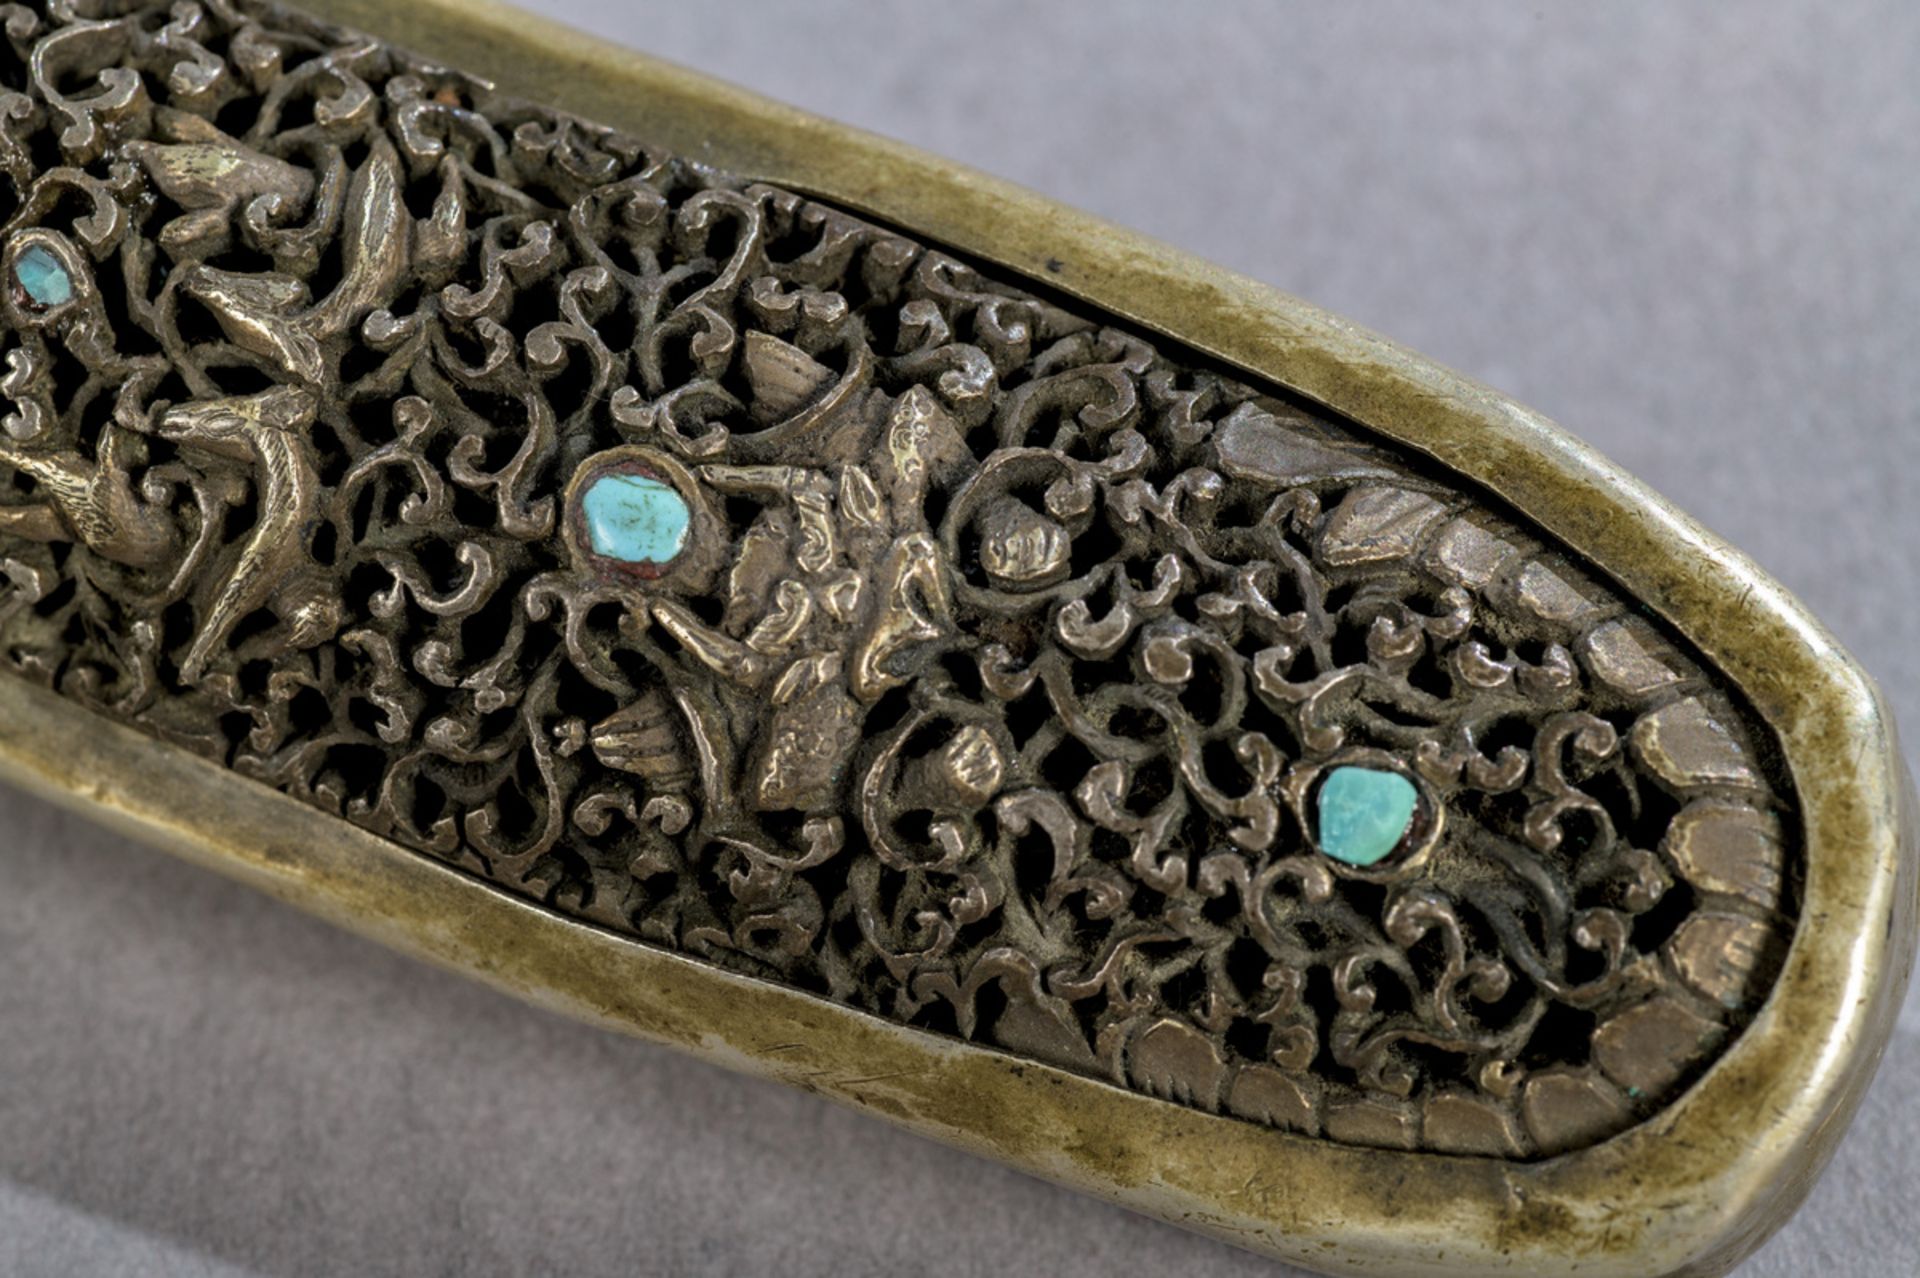 A dagger with openwork iron and gilt bronze decoration, Bhutan 18th - 19th century (tot 46.5 cm) - Image 6 of 7